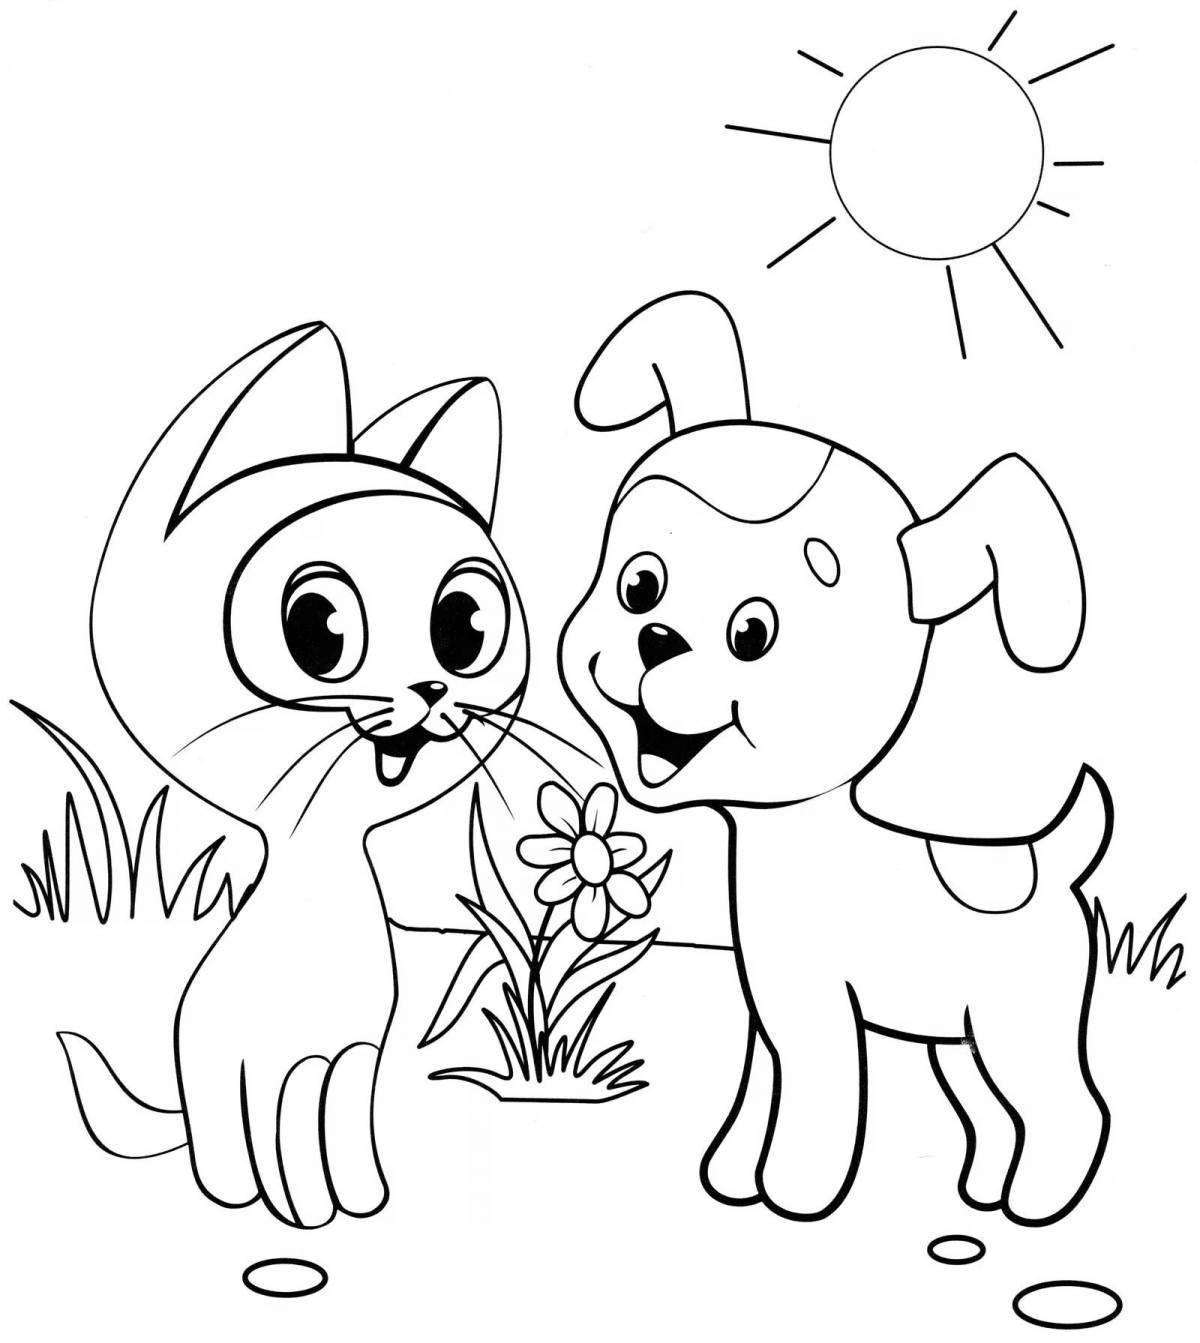 Adorable cat and puppy coloring book